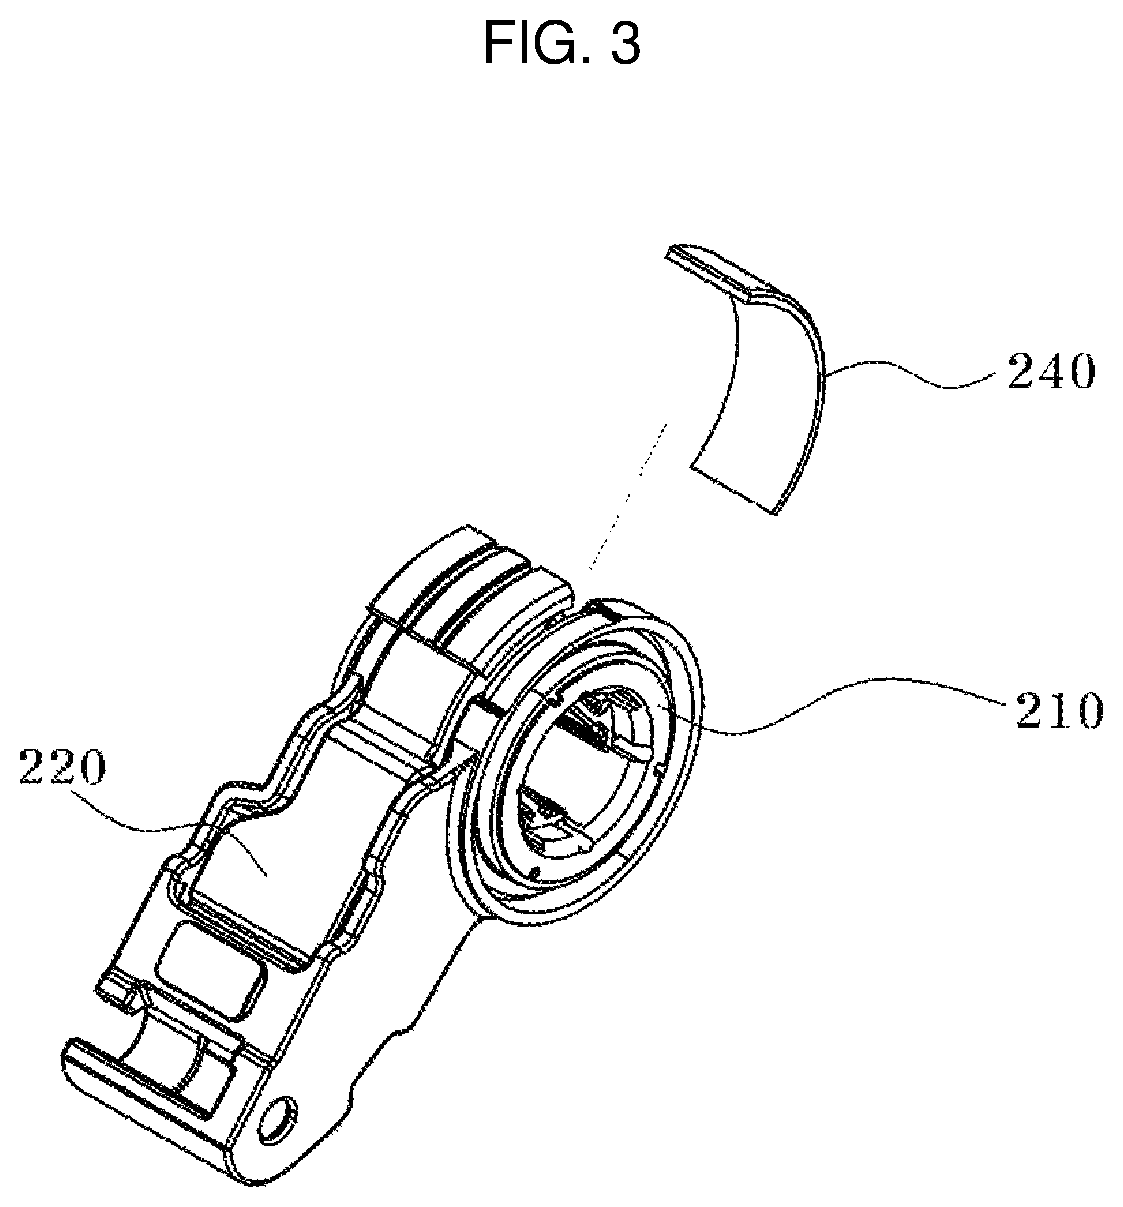 Acceleration pedal for vehicle